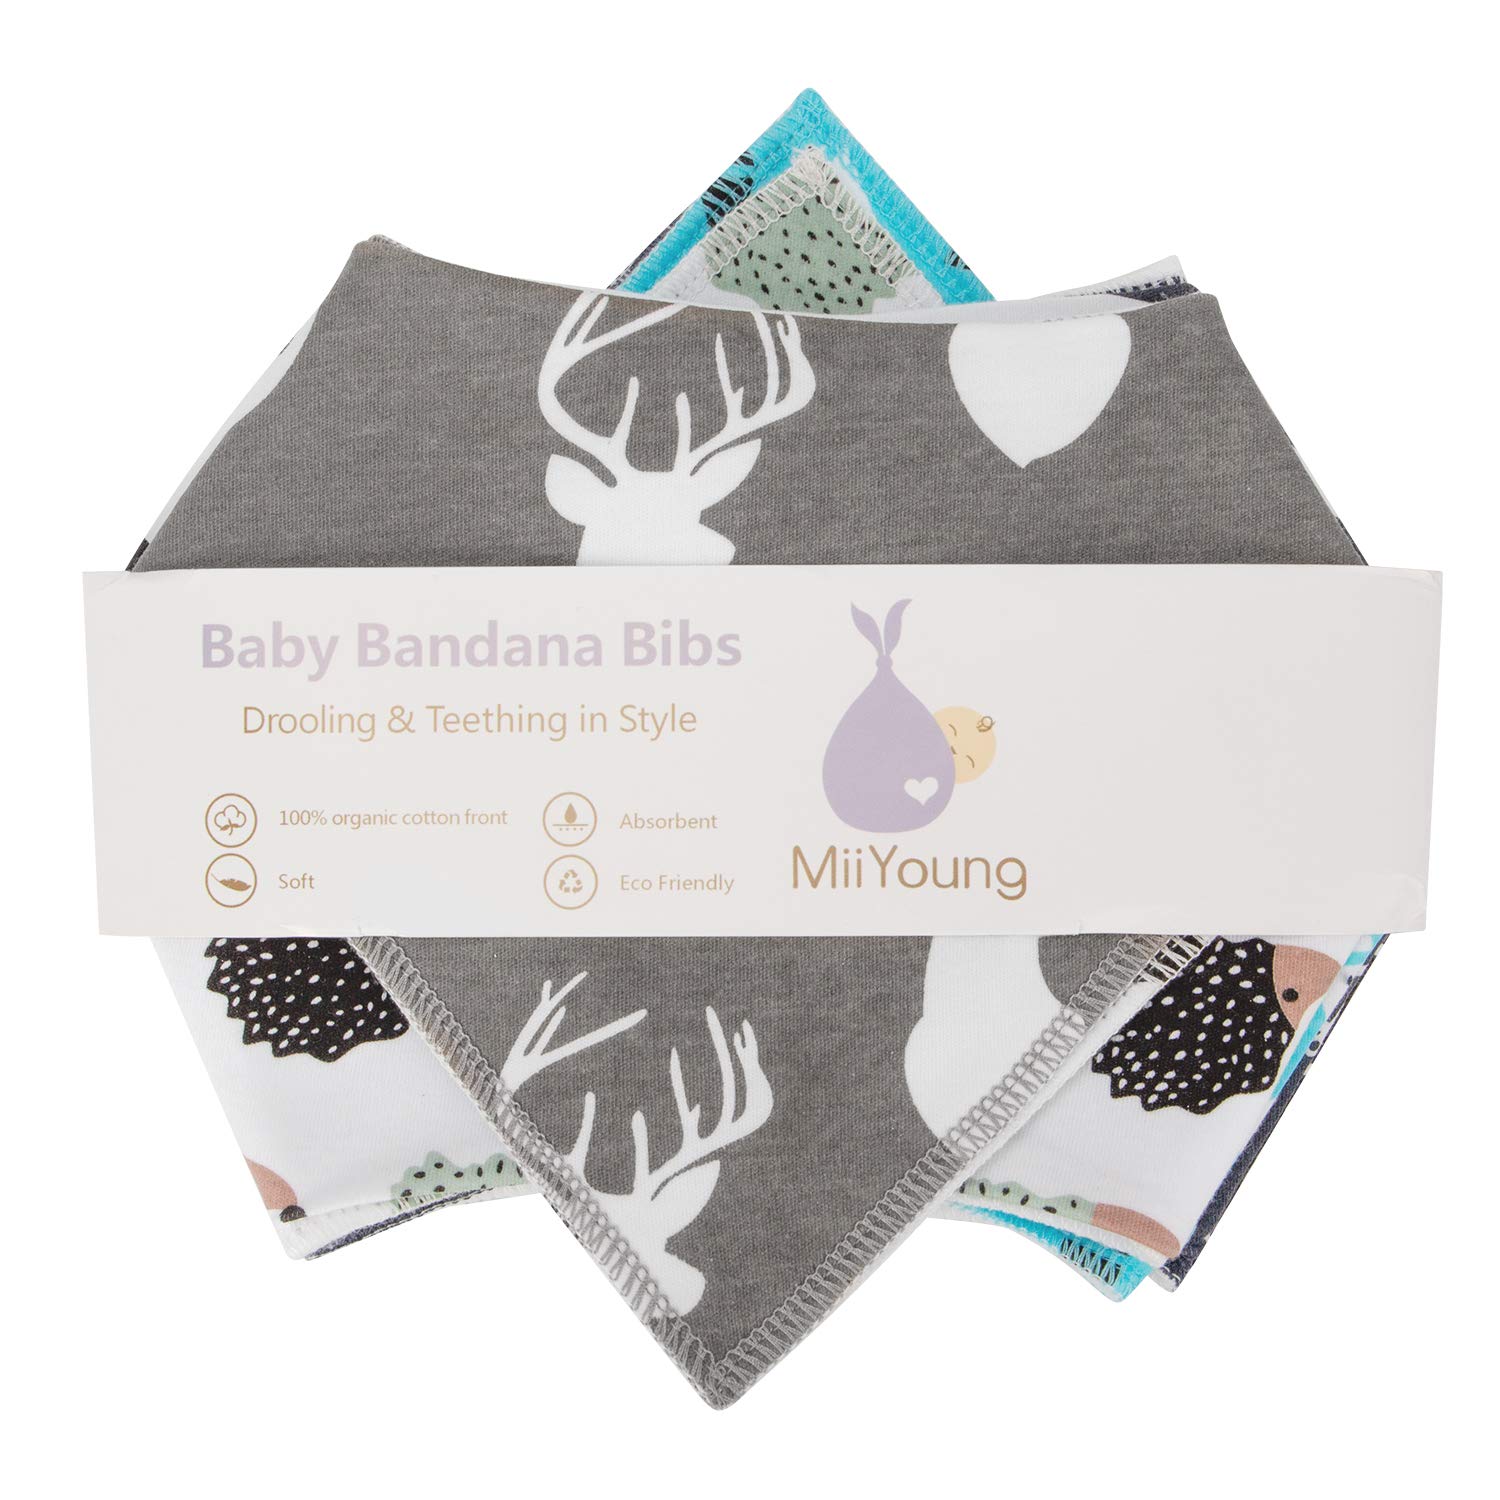 MiiYoung Baby Bibs Baby Bandana Drool Bibs for Drooling and Teething, 100% Organic Cotton and Super Absorbent Bibs for Baby Boys